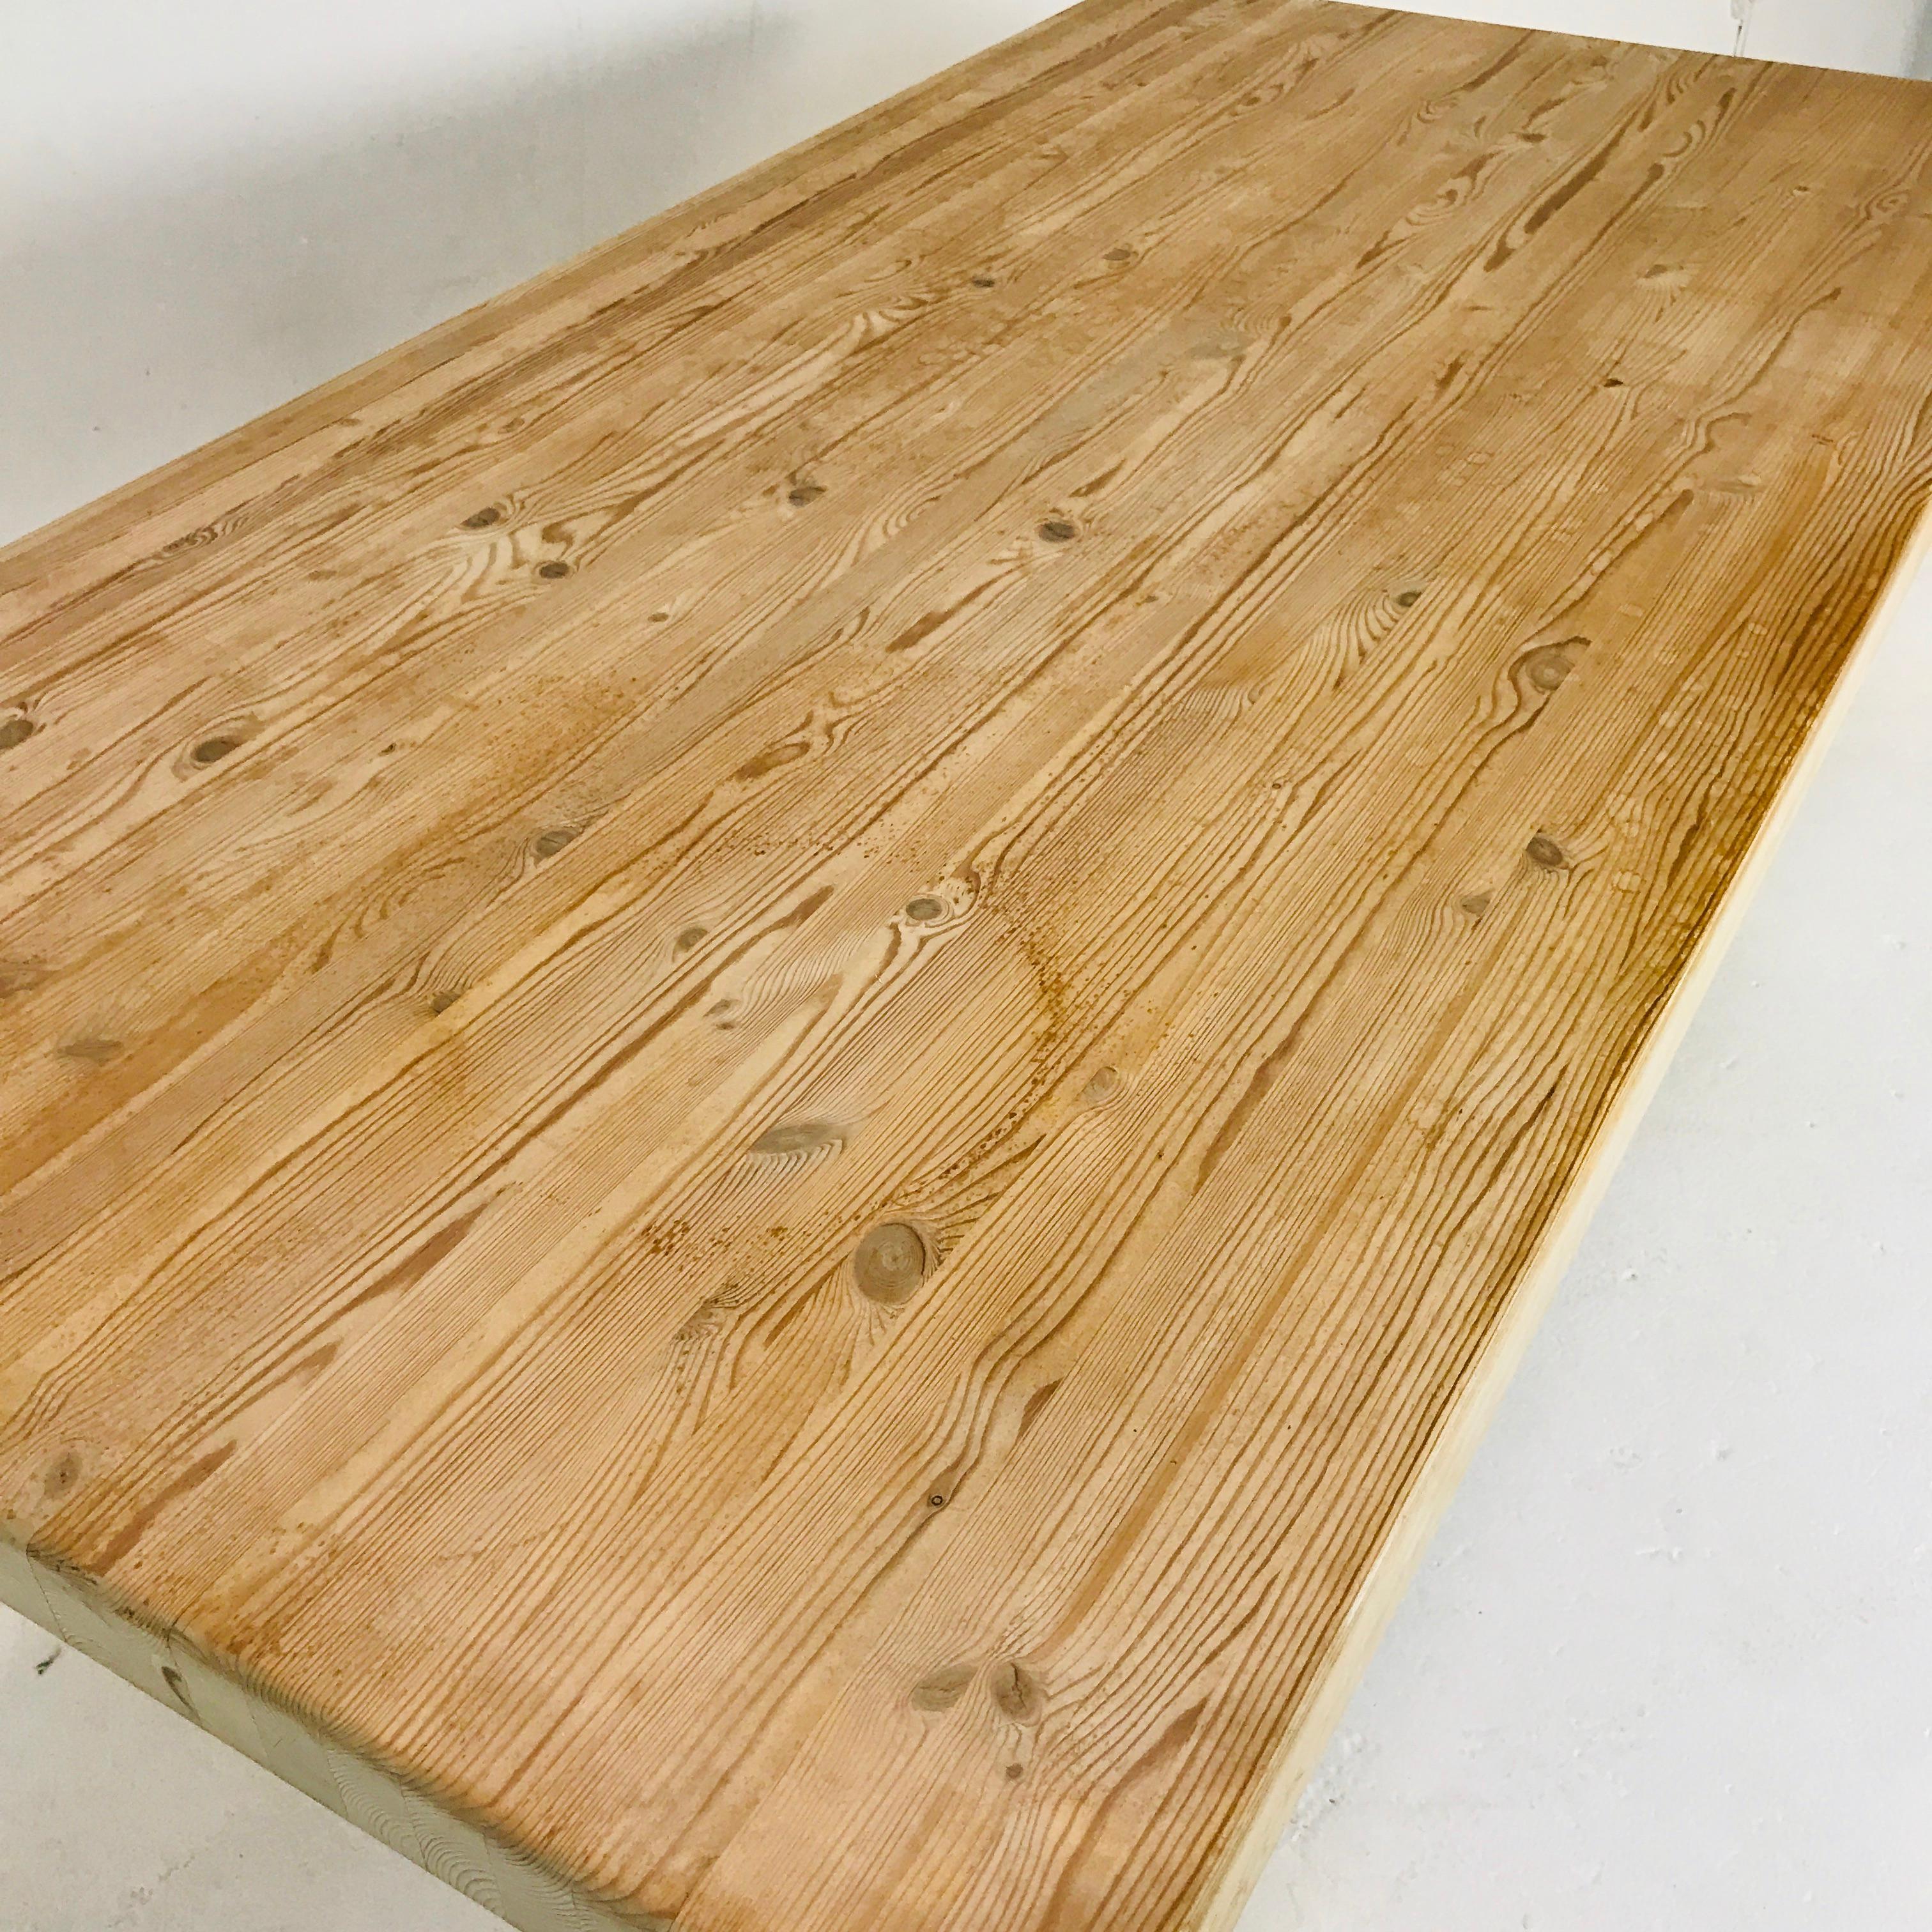 Late 20th Century Substantial Solid Scandinavian Pine Butcher Block Dining Table